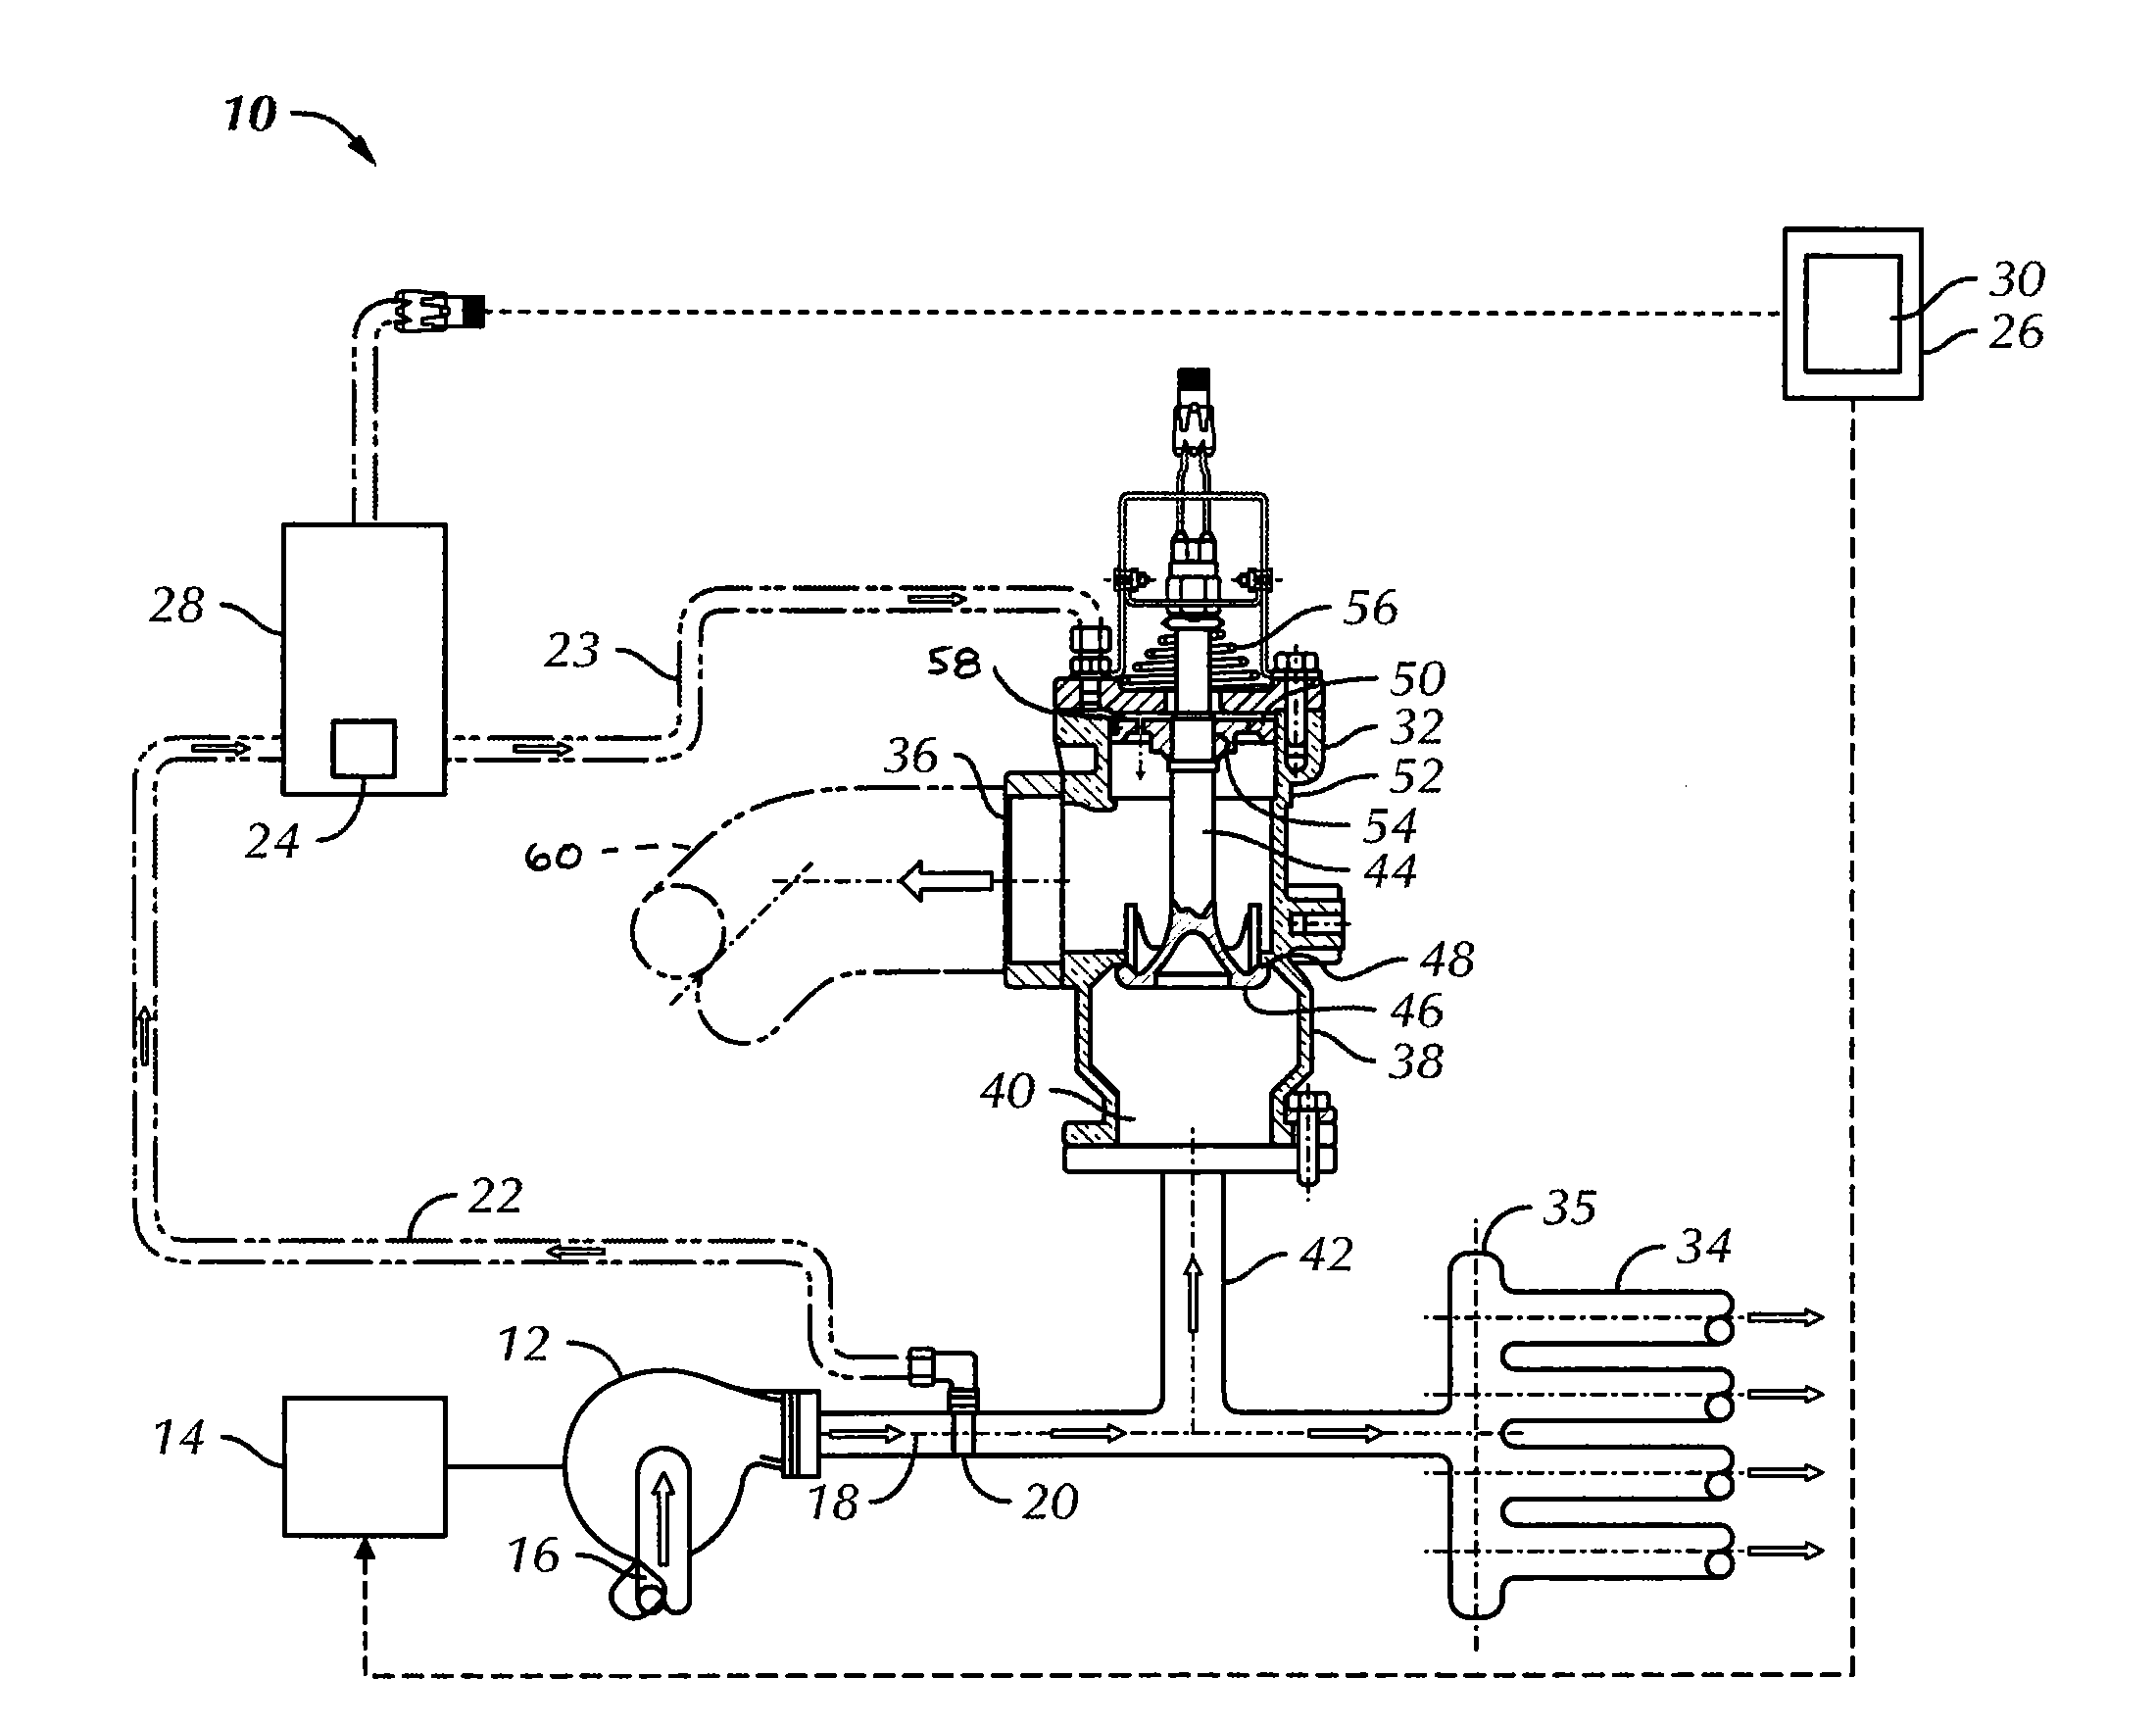 Method for controlling the discharge pressure of an engine-driven pump